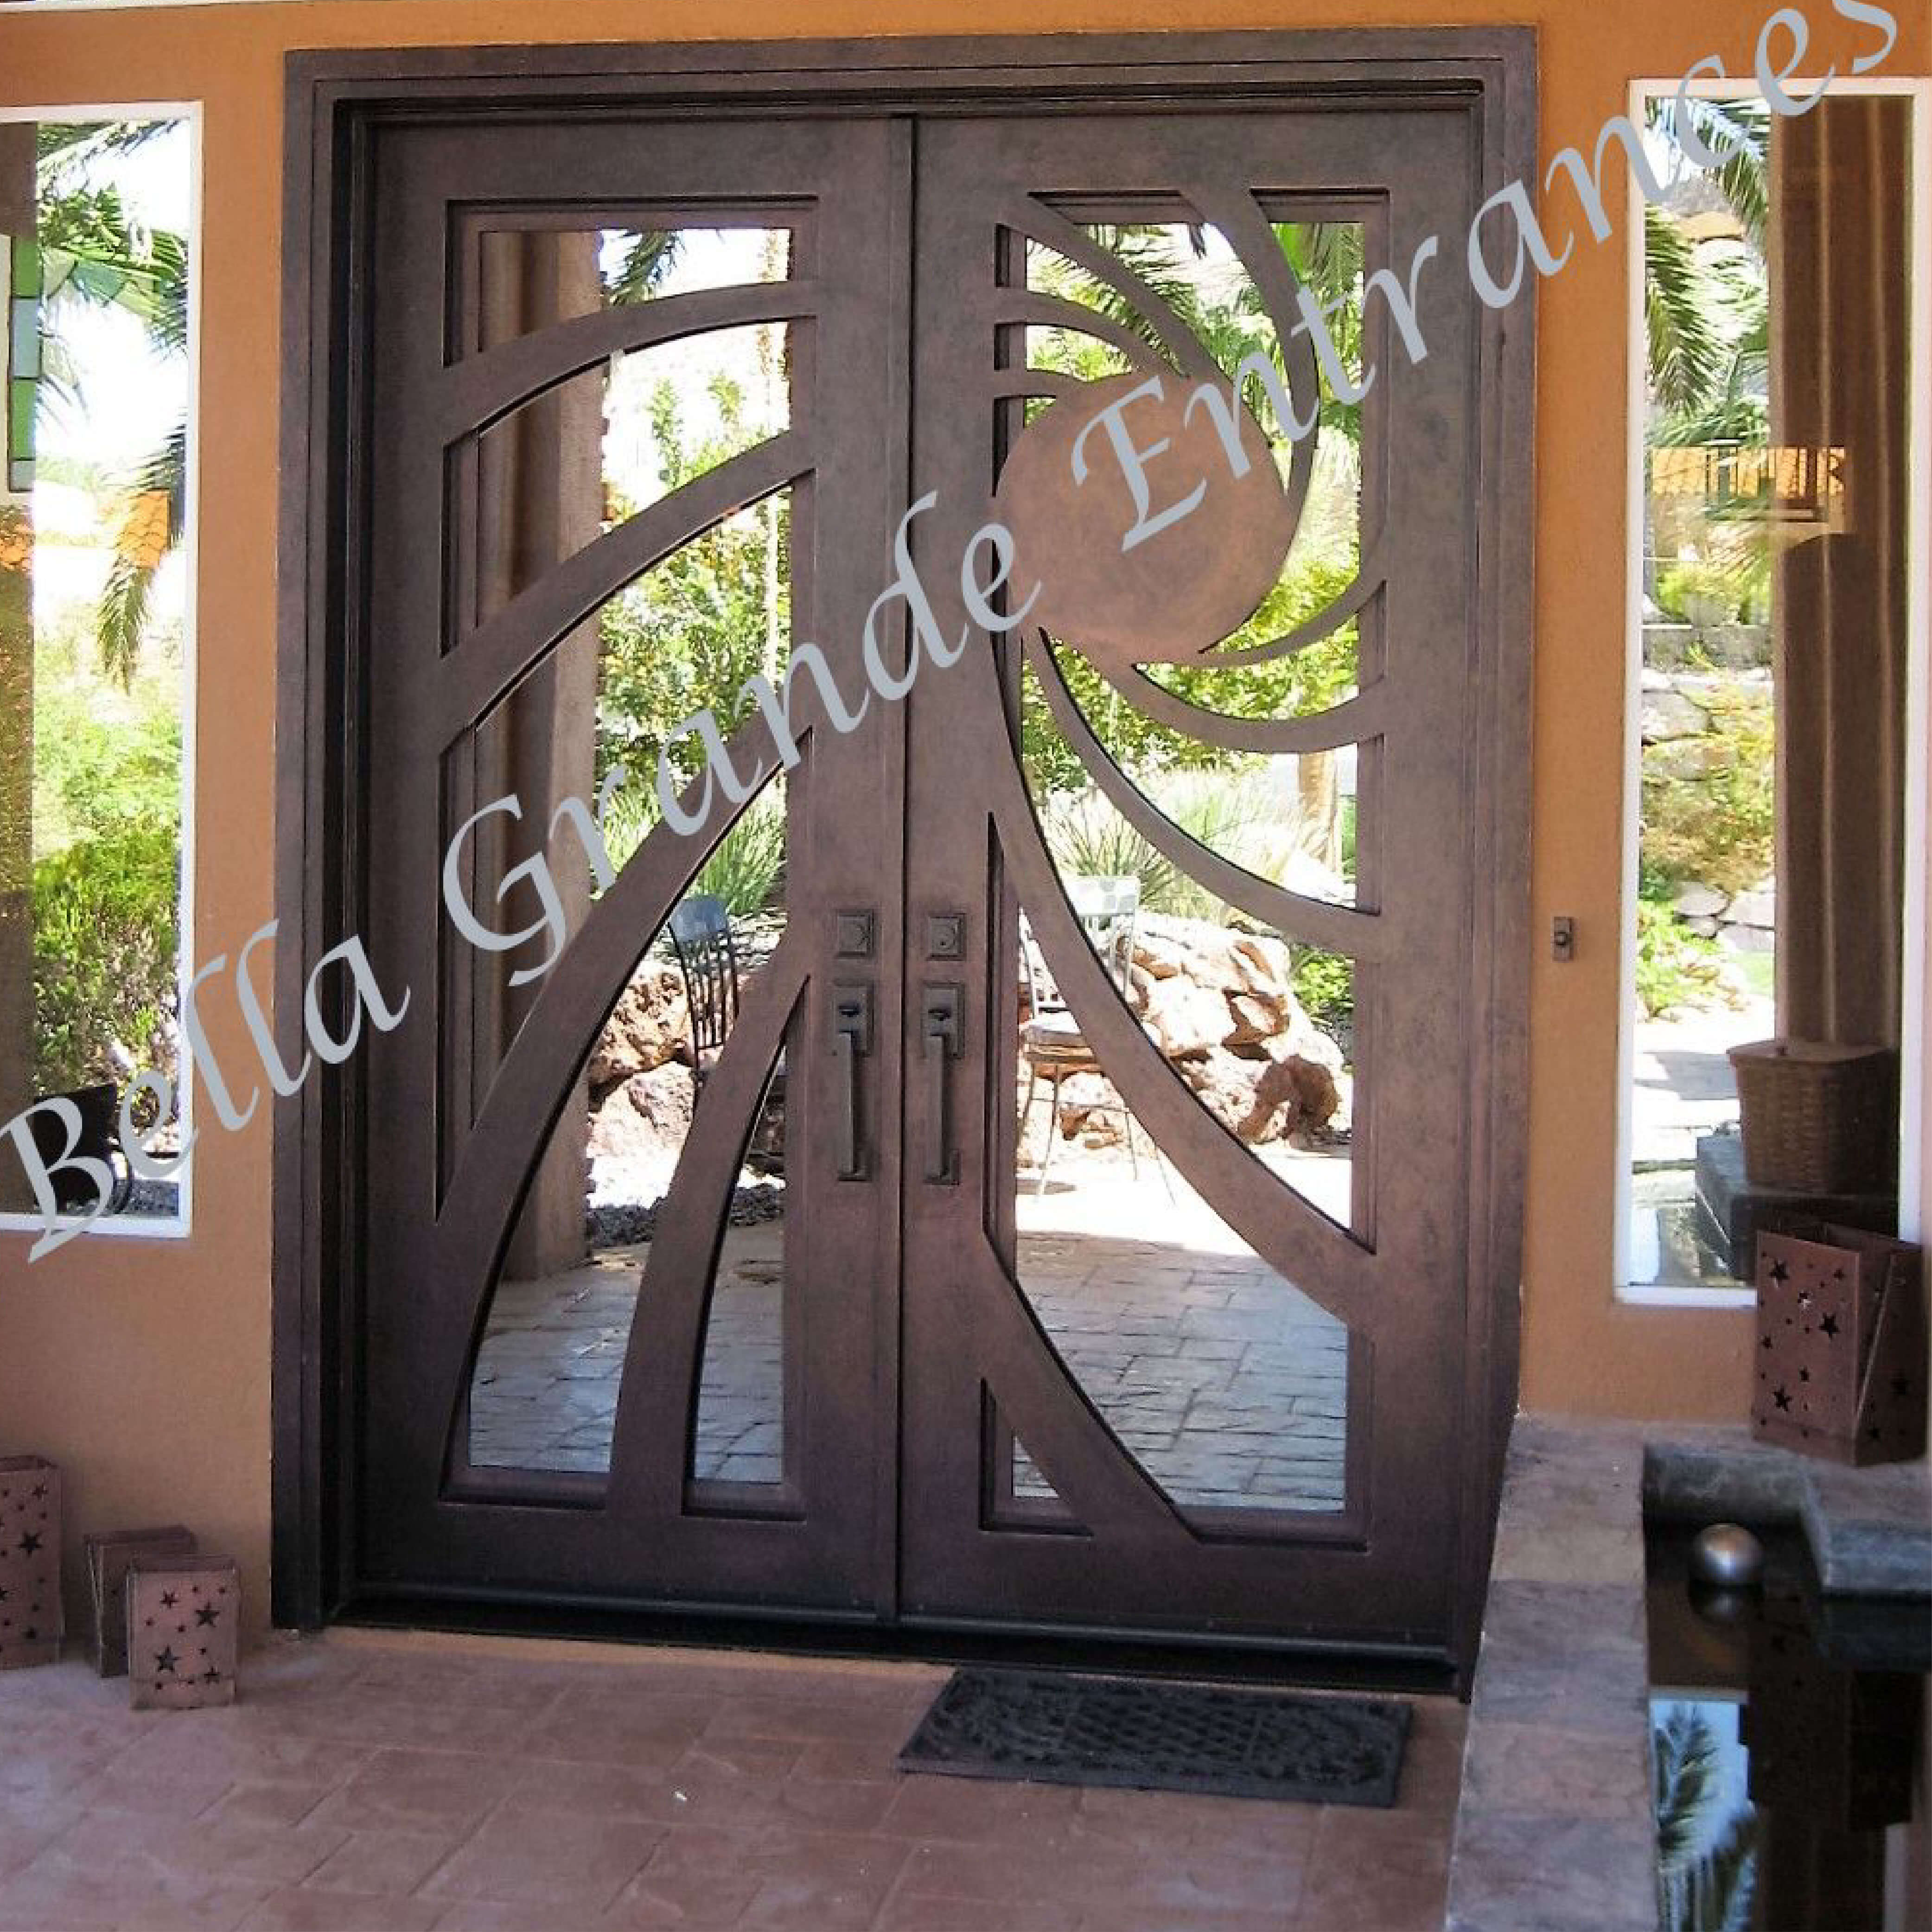 After installing the Bella Grande Entrances Double Iron Model 2318 door, take a look at the image.